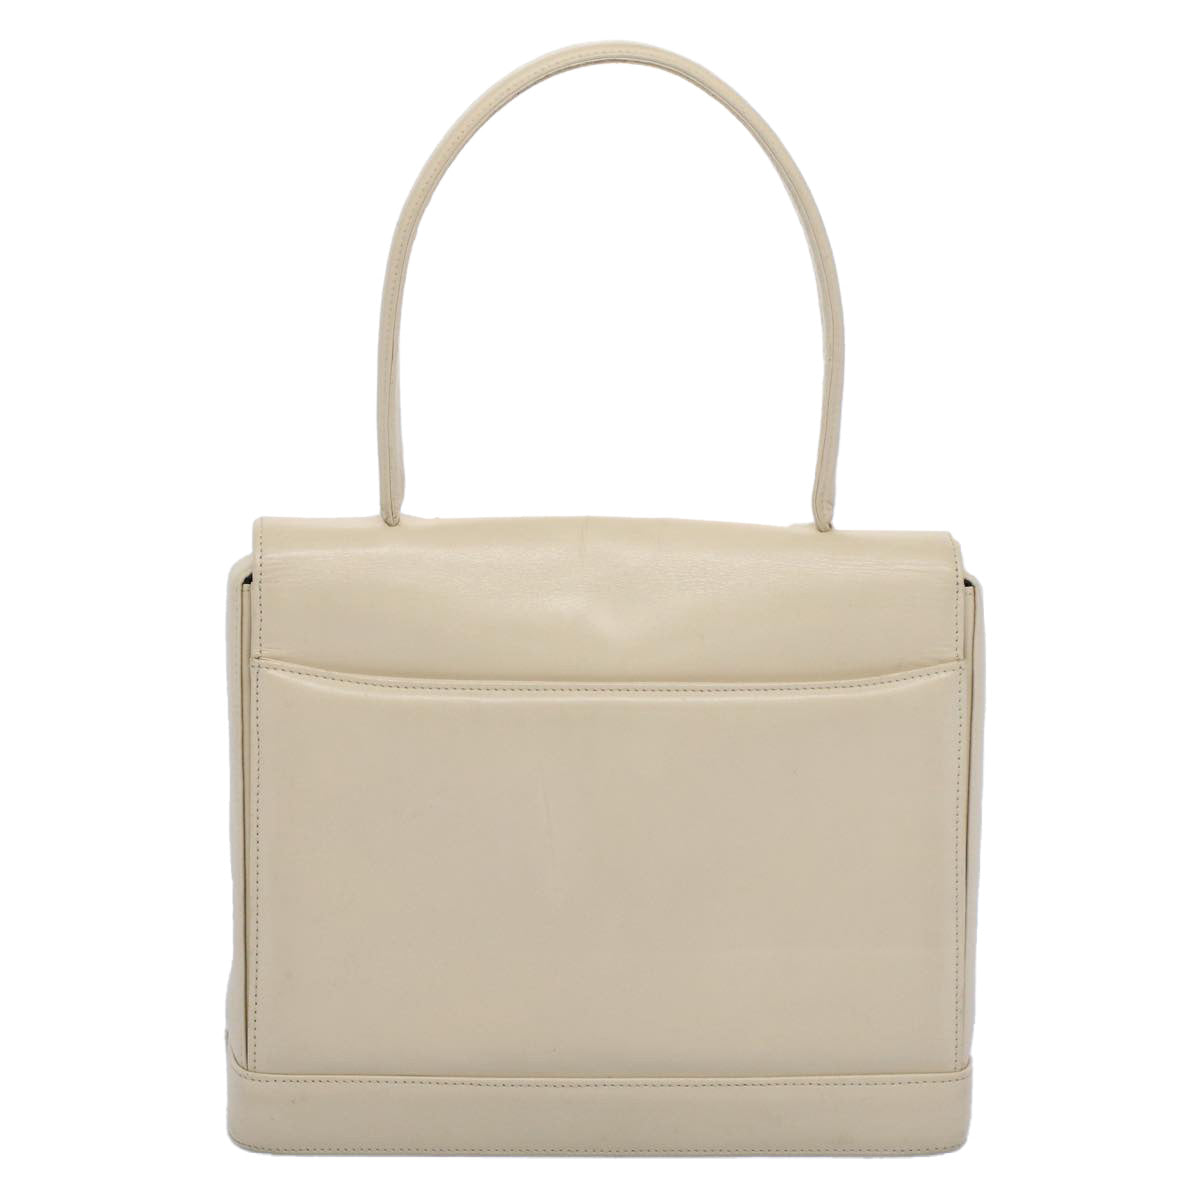 GIVENCHY Hand Bag Leather Beige Auth ep1621 - 0